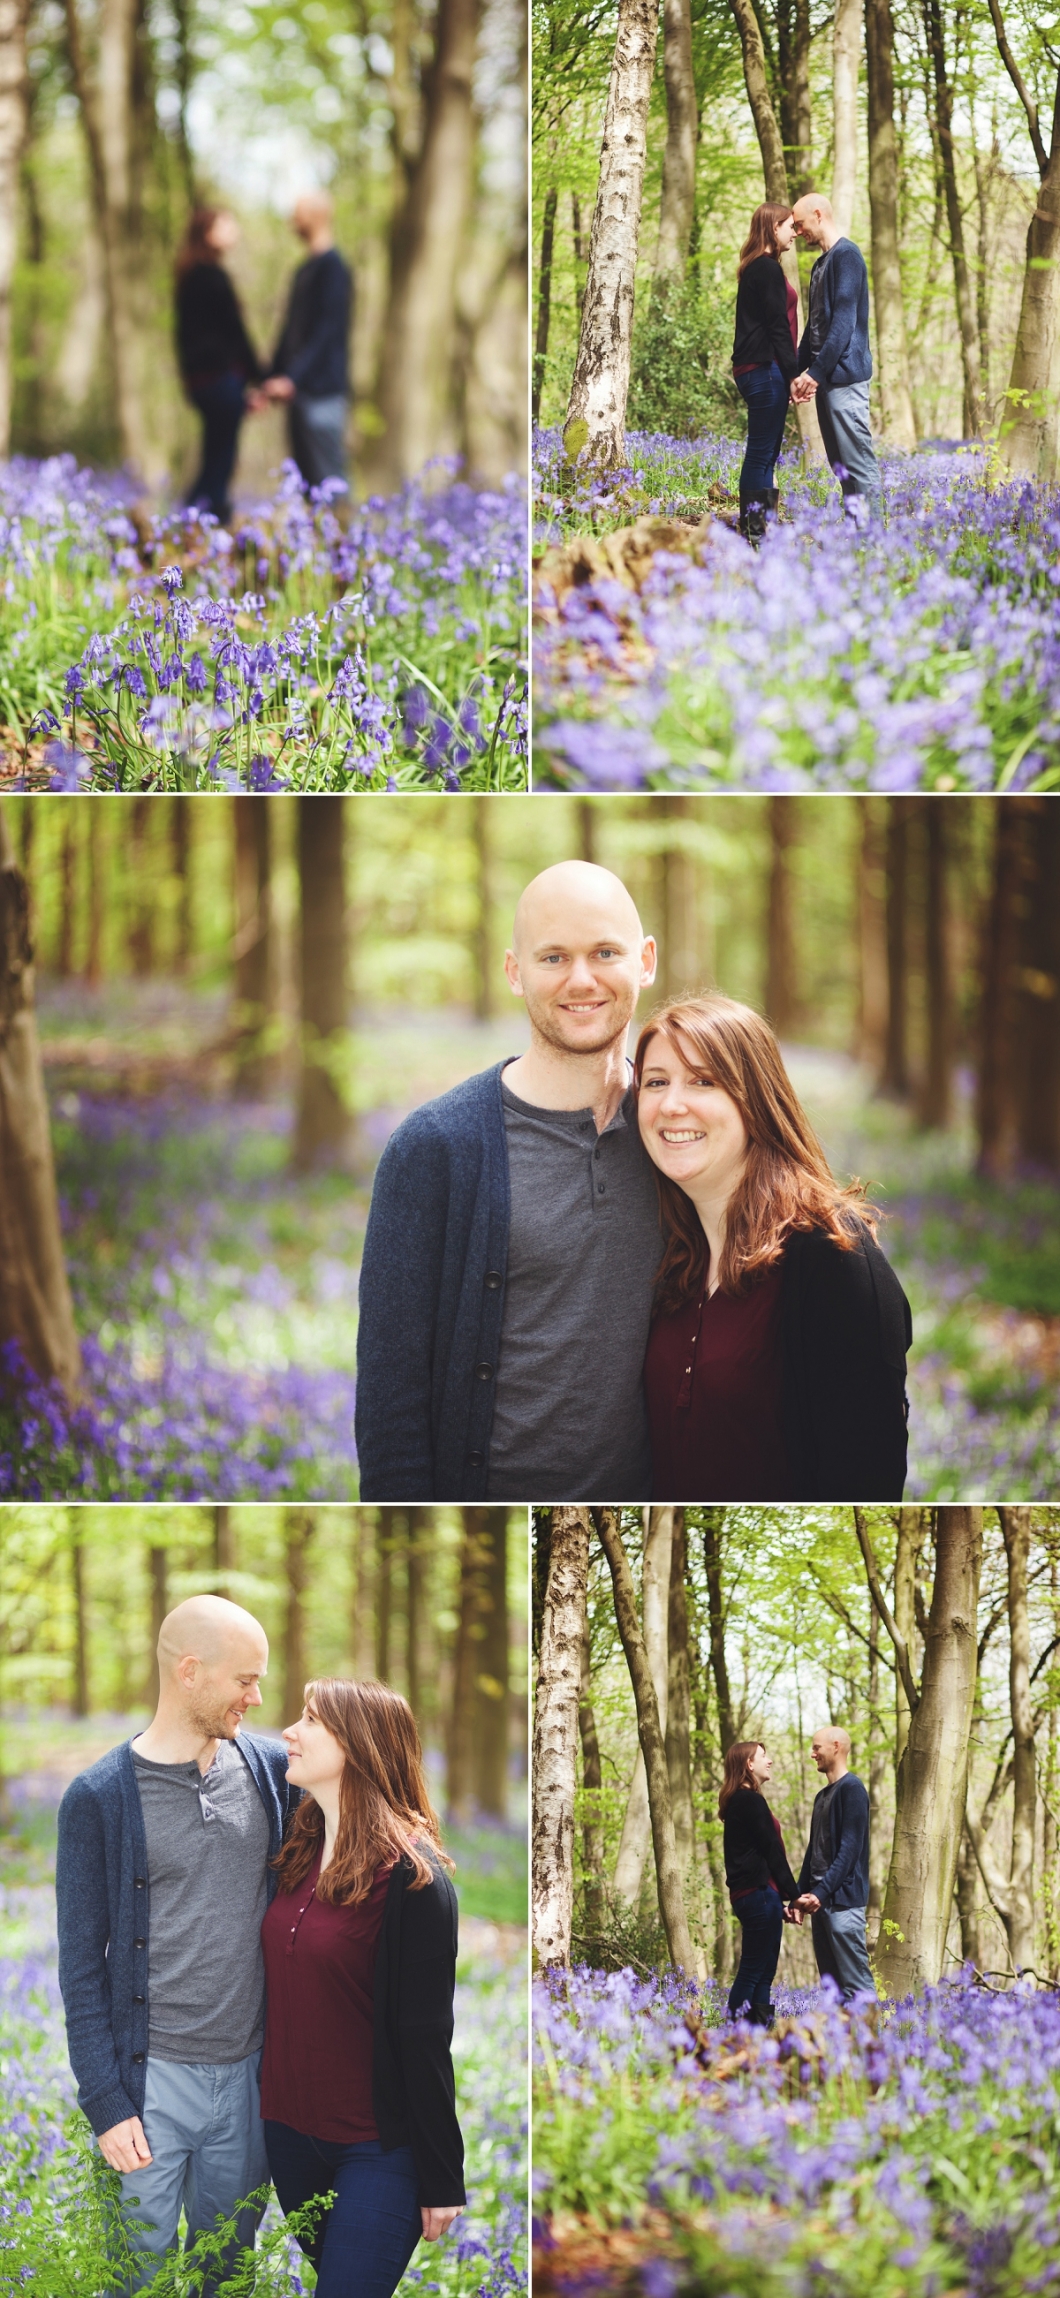 Gorgeous couple in the bluebell woods celebrating their engagement photography